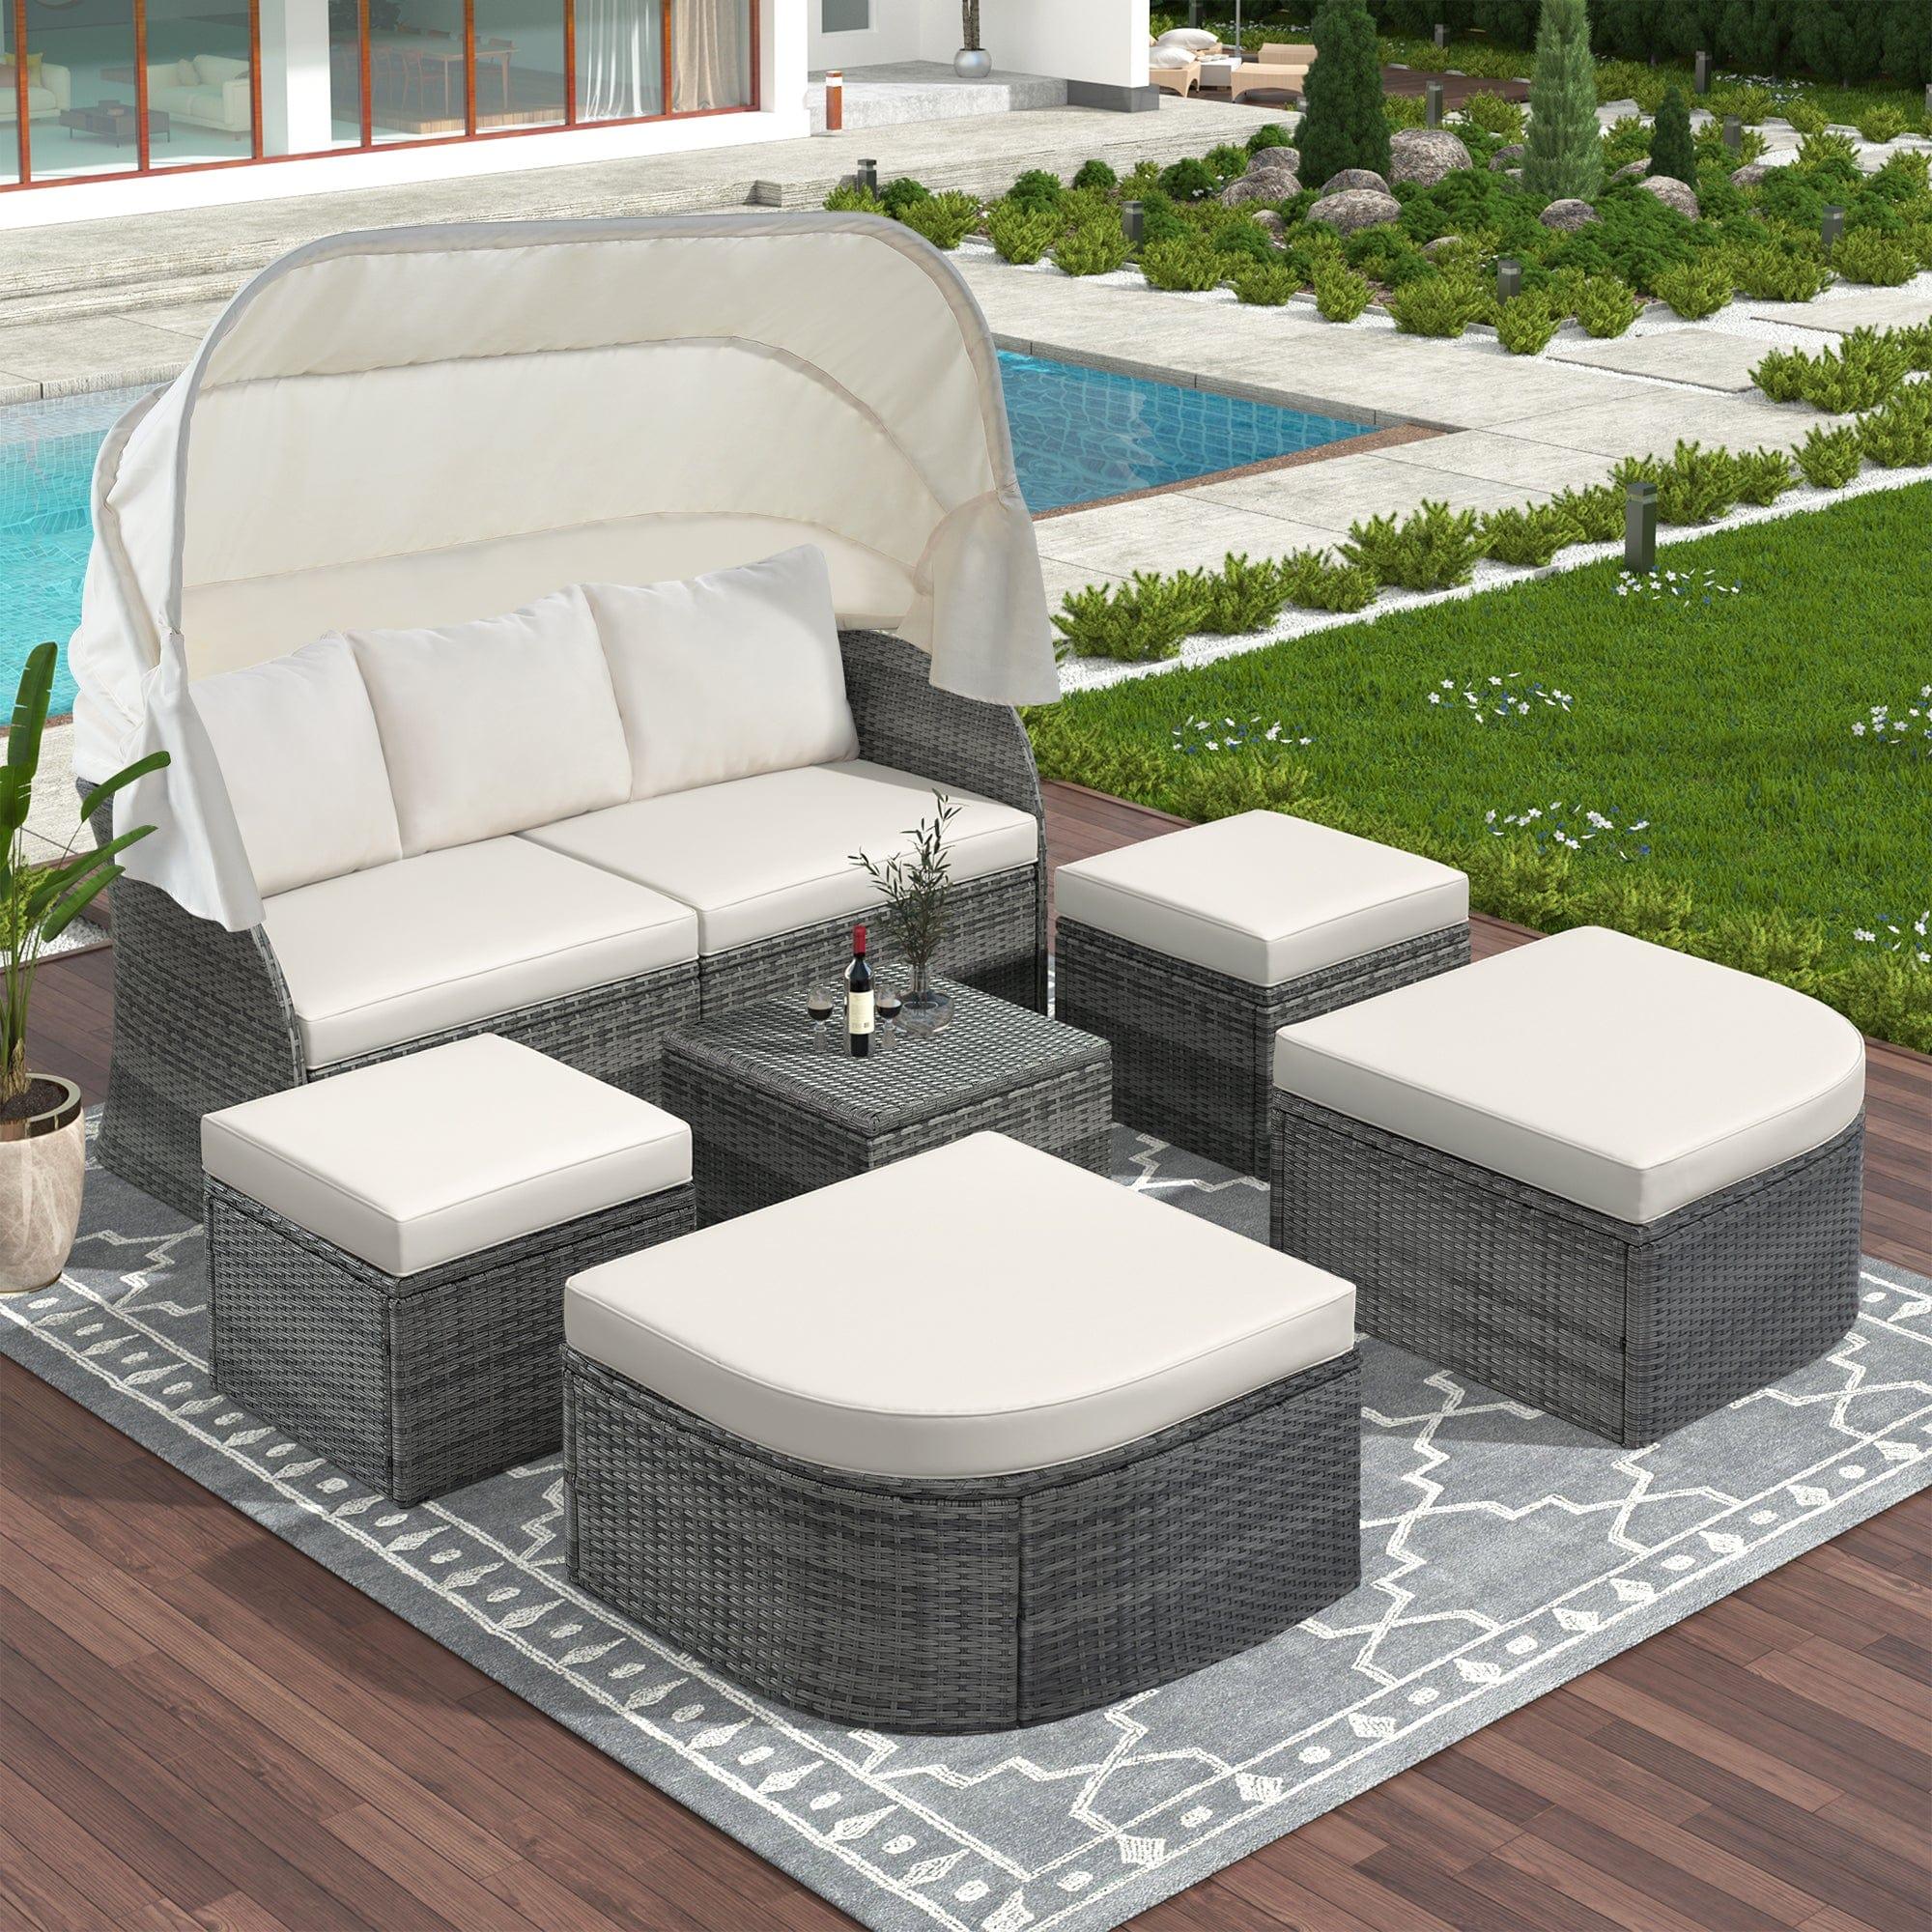 Shop U_STYLE Outdoor Patio Furniture Set Daybed Sunbed with Retractable Canopy Conversation Set Wicker Furniture Sofa Set Mademoiselle Home Decor